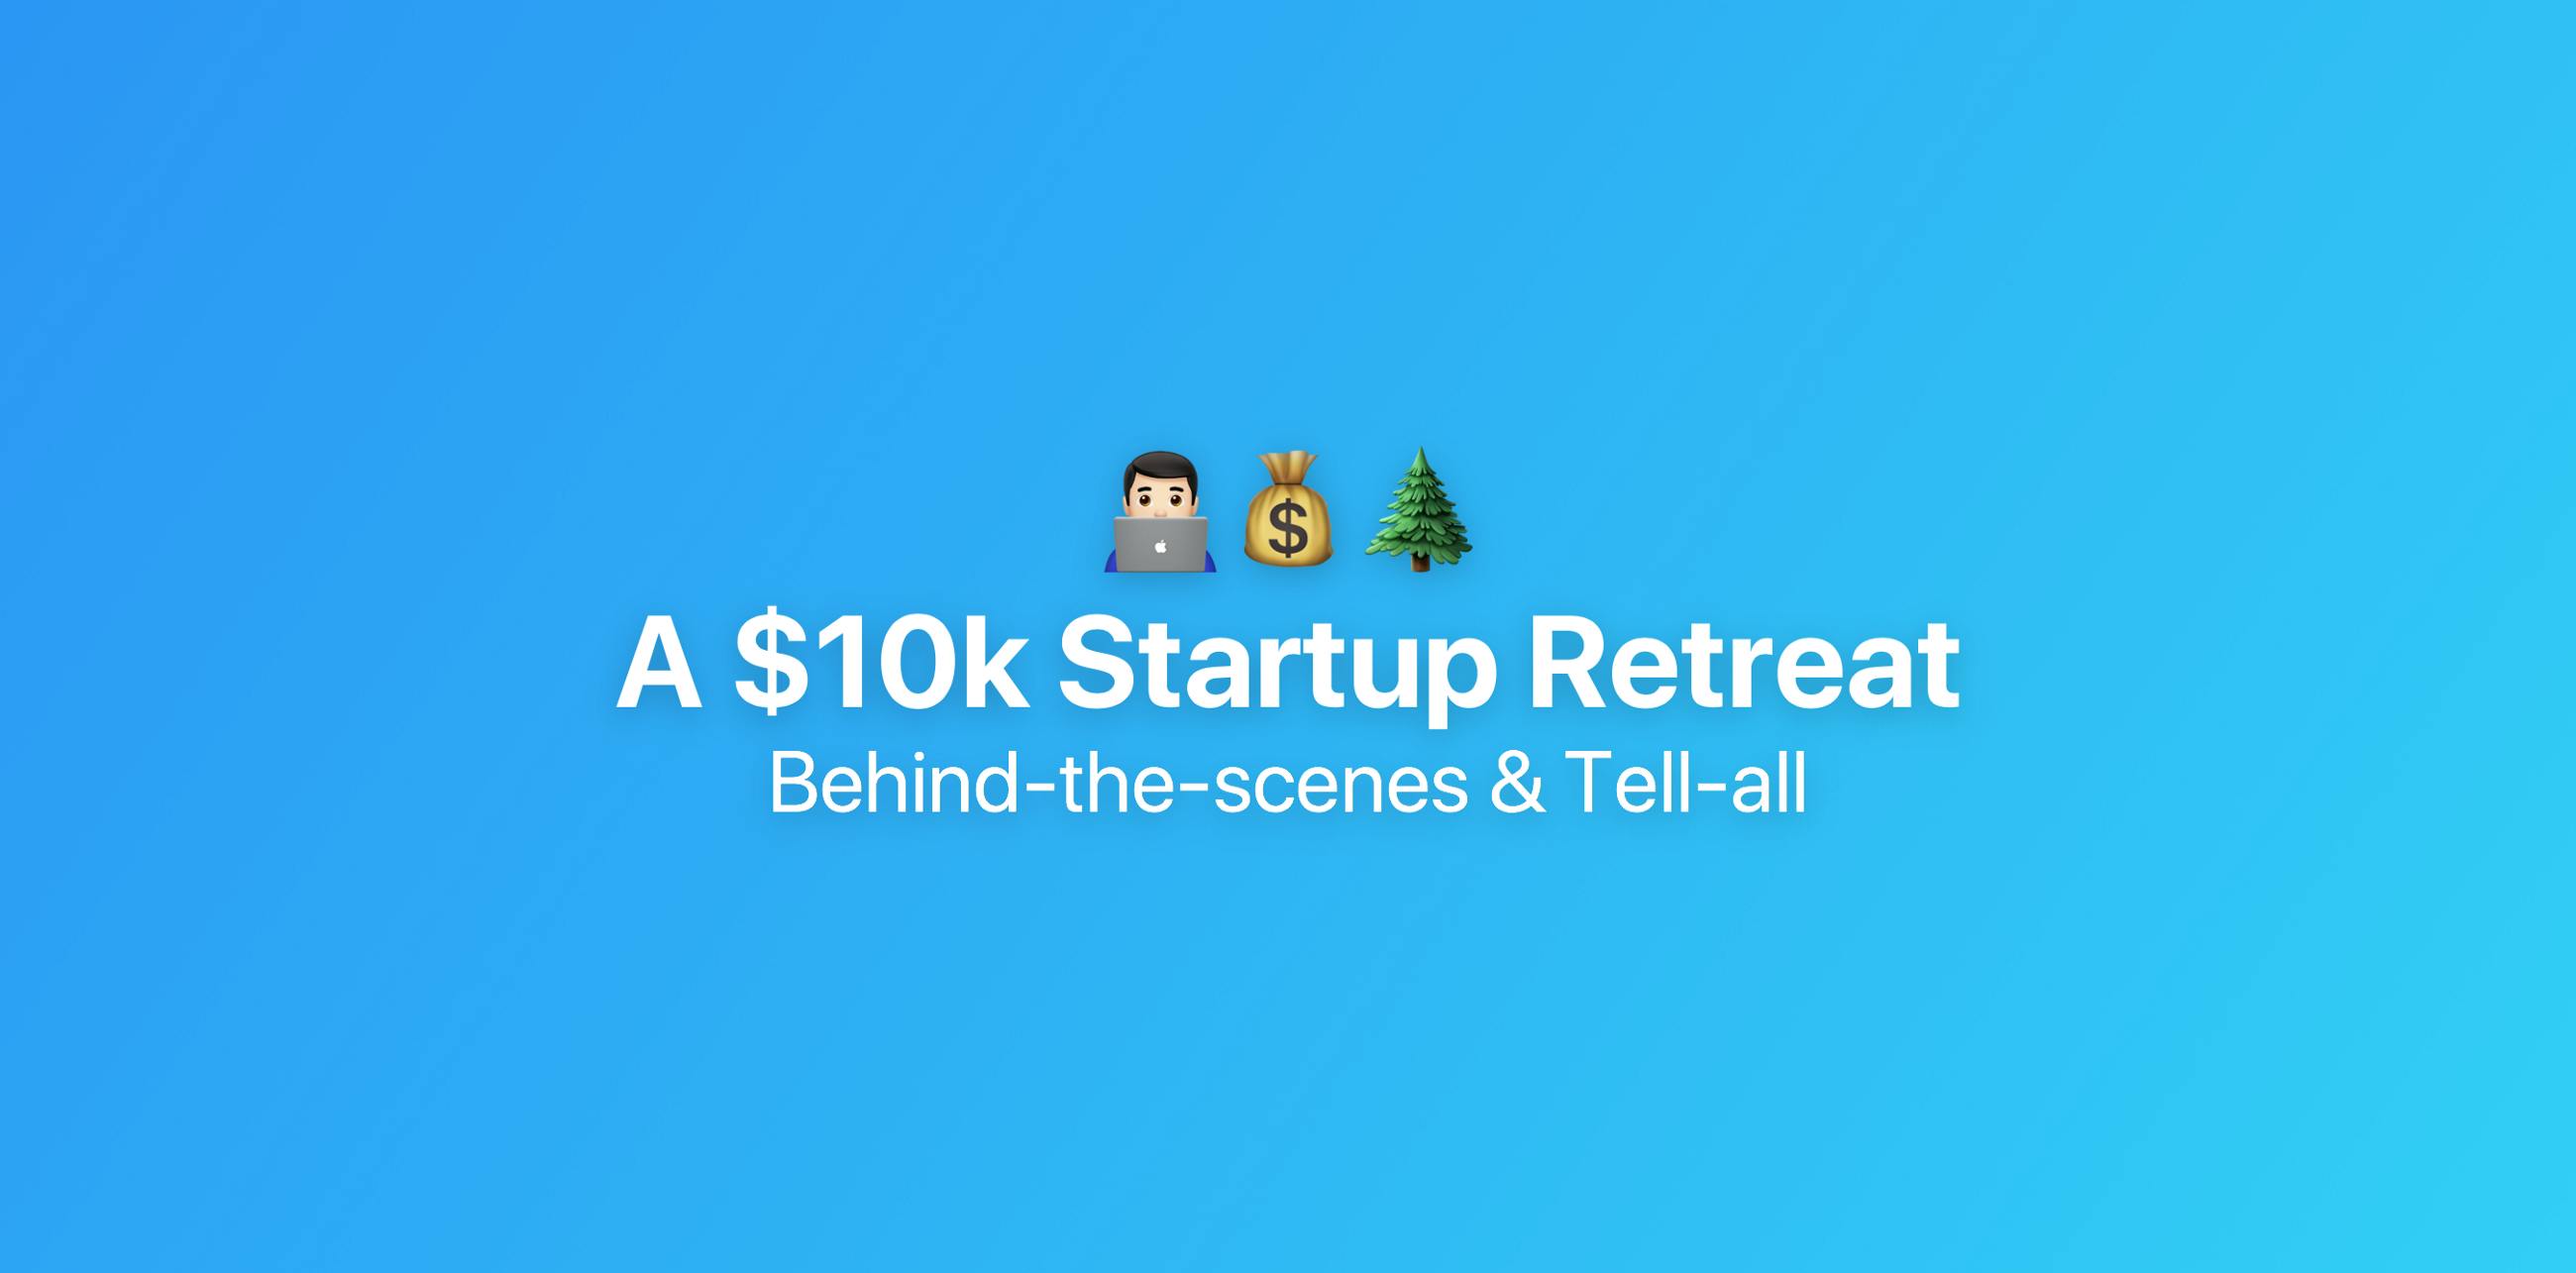 /why-and-how-our-startup-spends-10k-on-our-annual-retreat-d23aa28b6f1 feature image